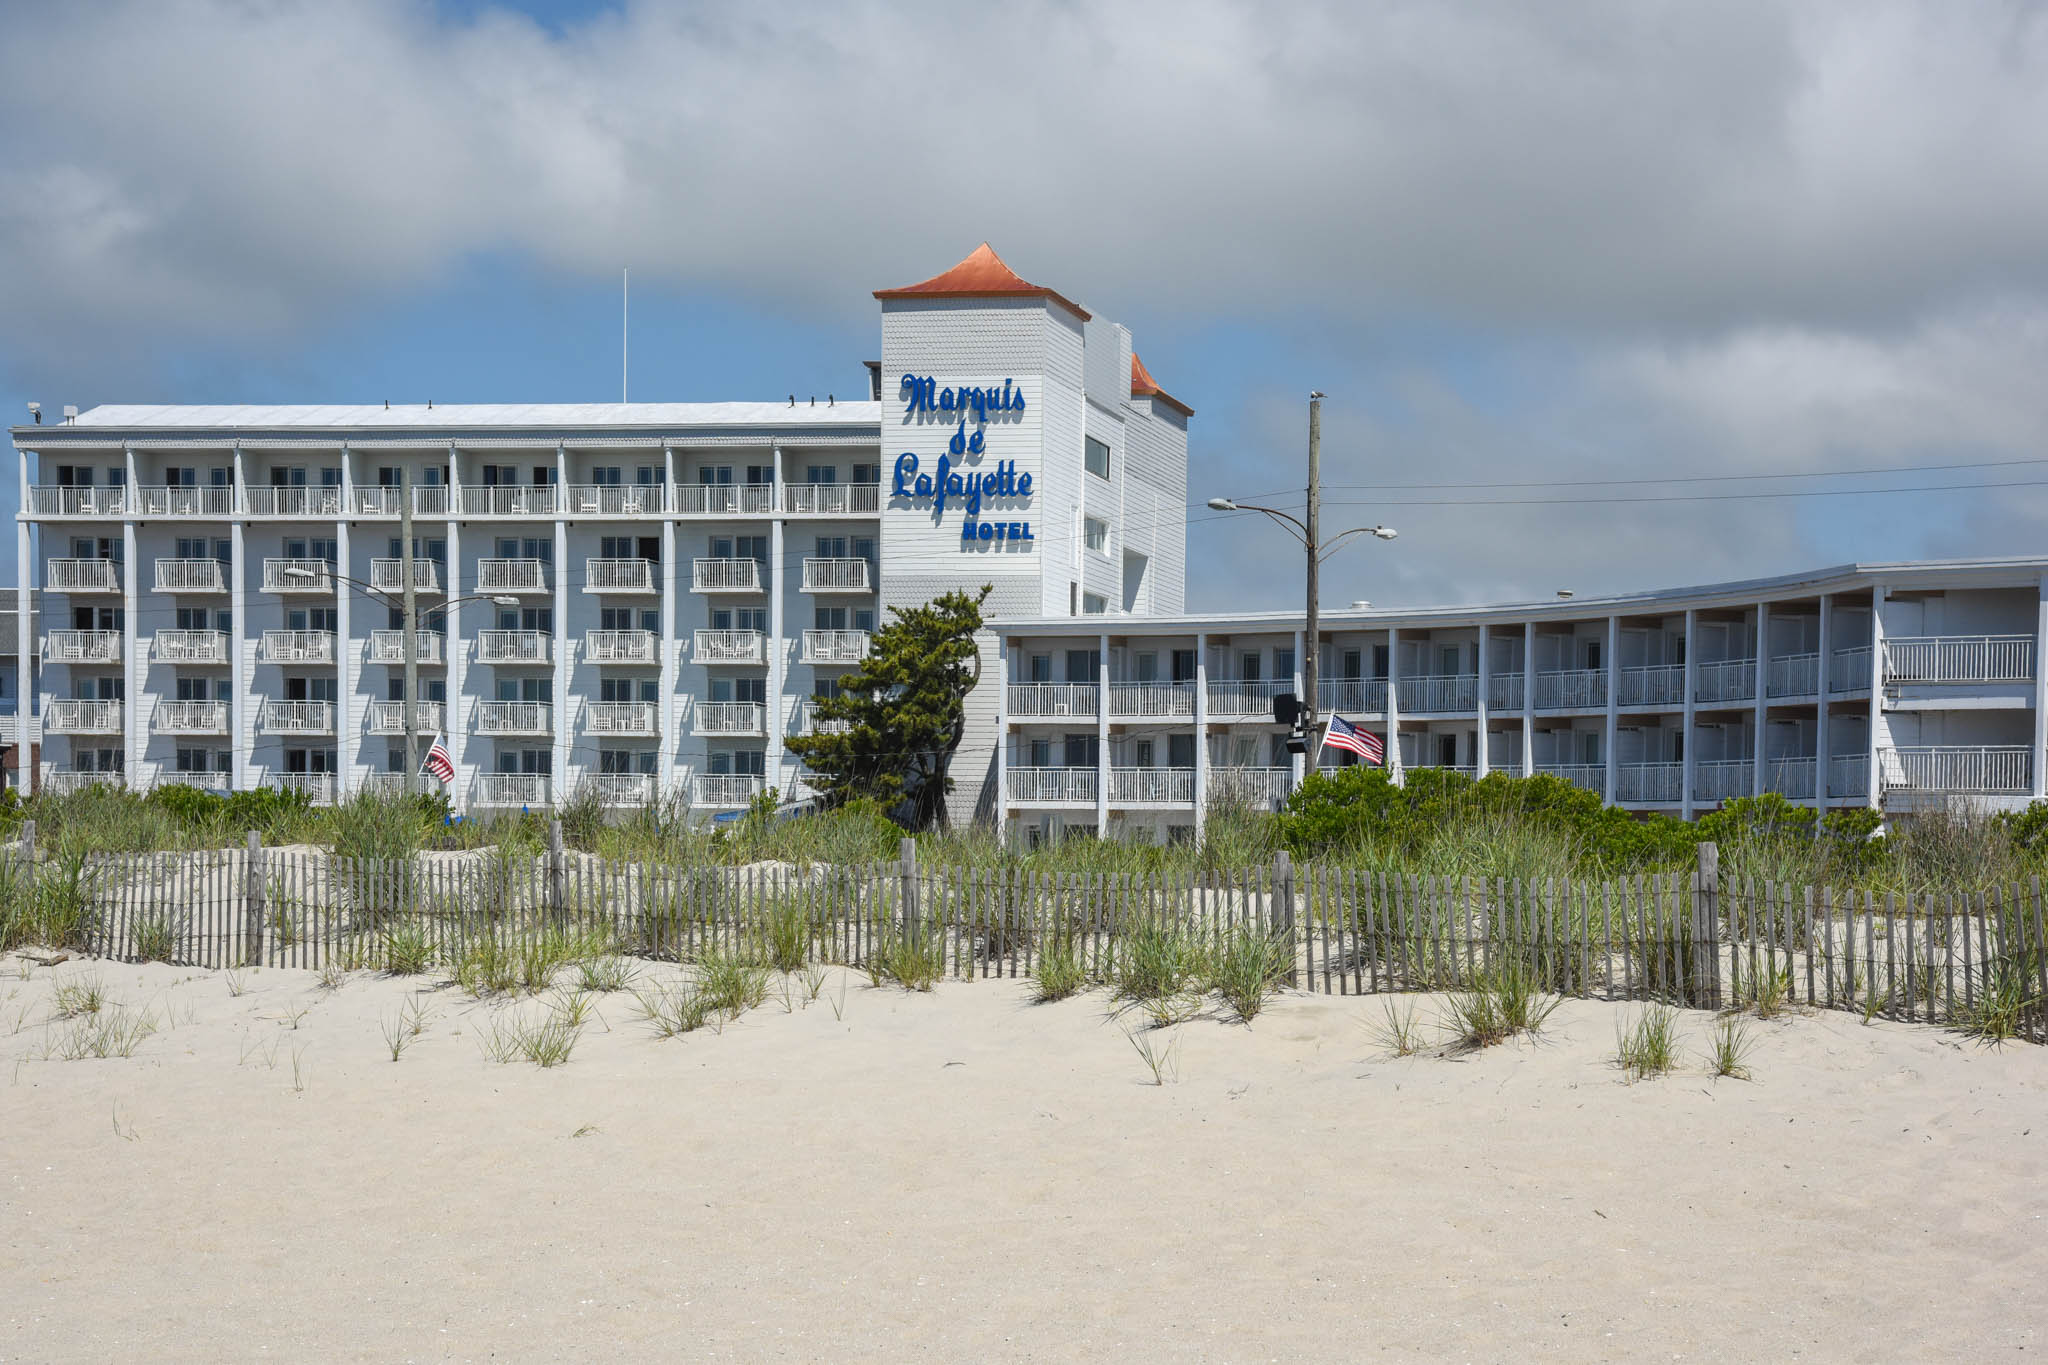 On the beach looking over the dunes at the Marquis de Lafayette Hotel